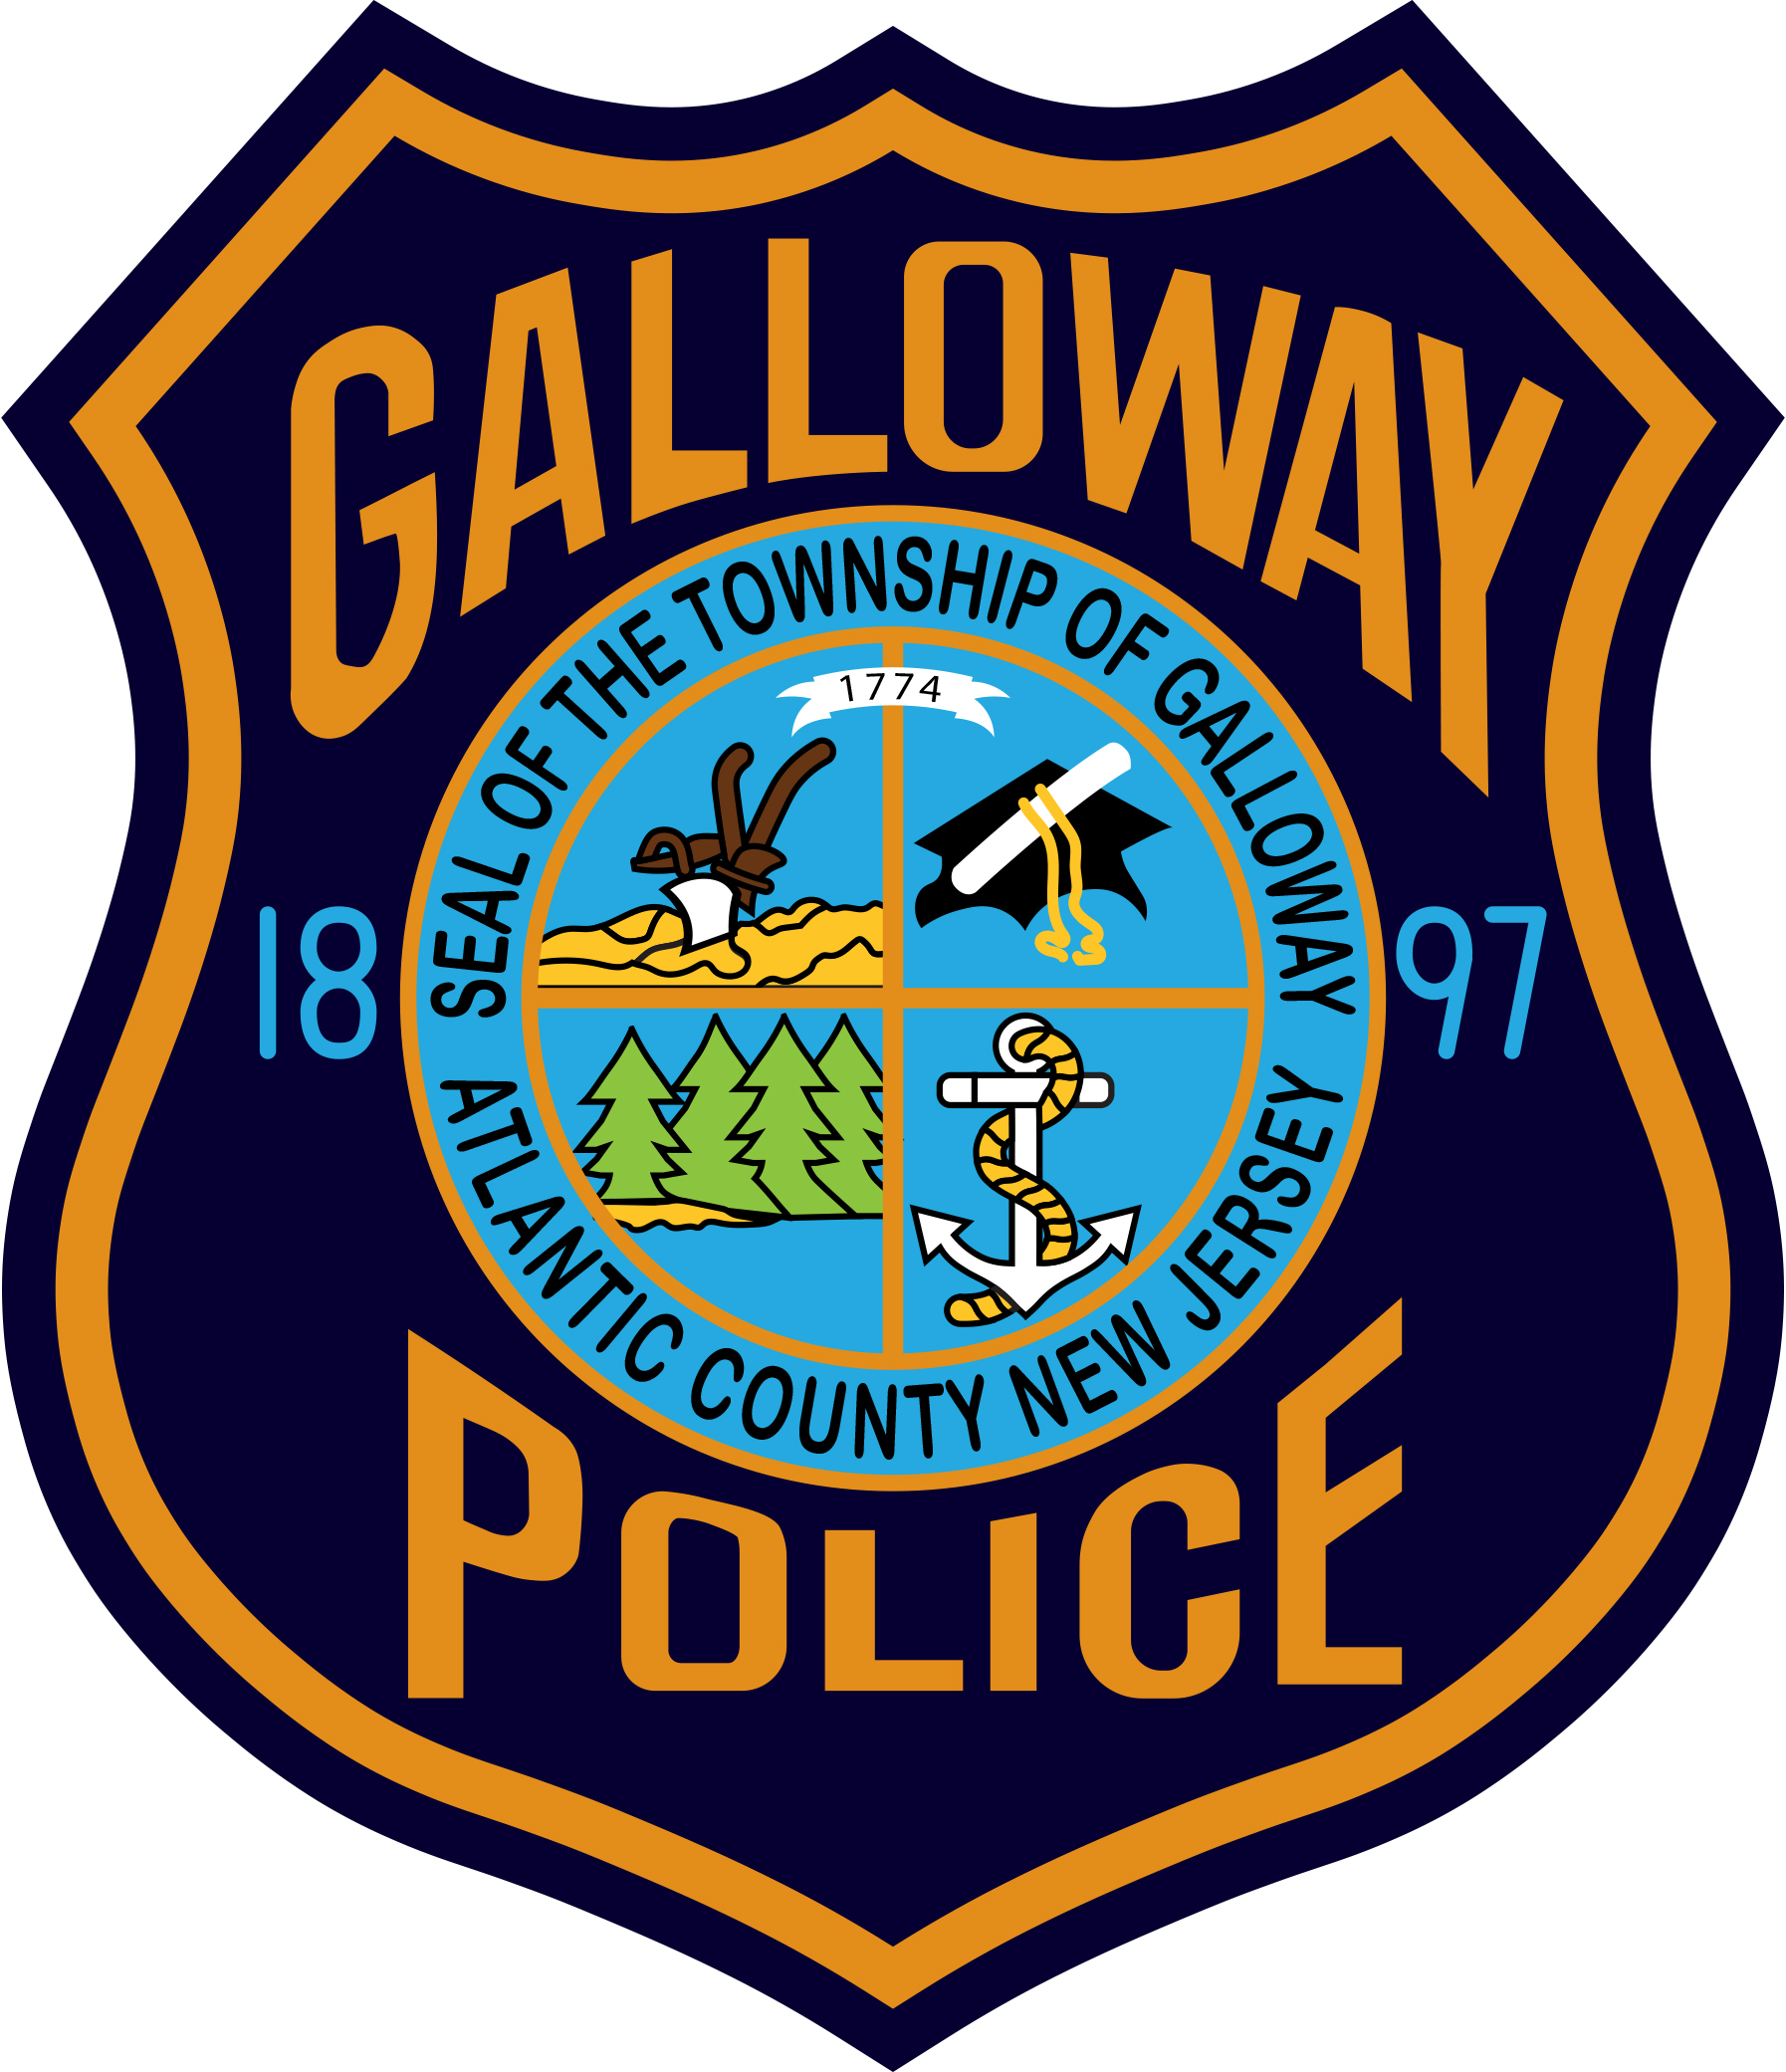 Galloway Township Police Department, NJ Police Jobs